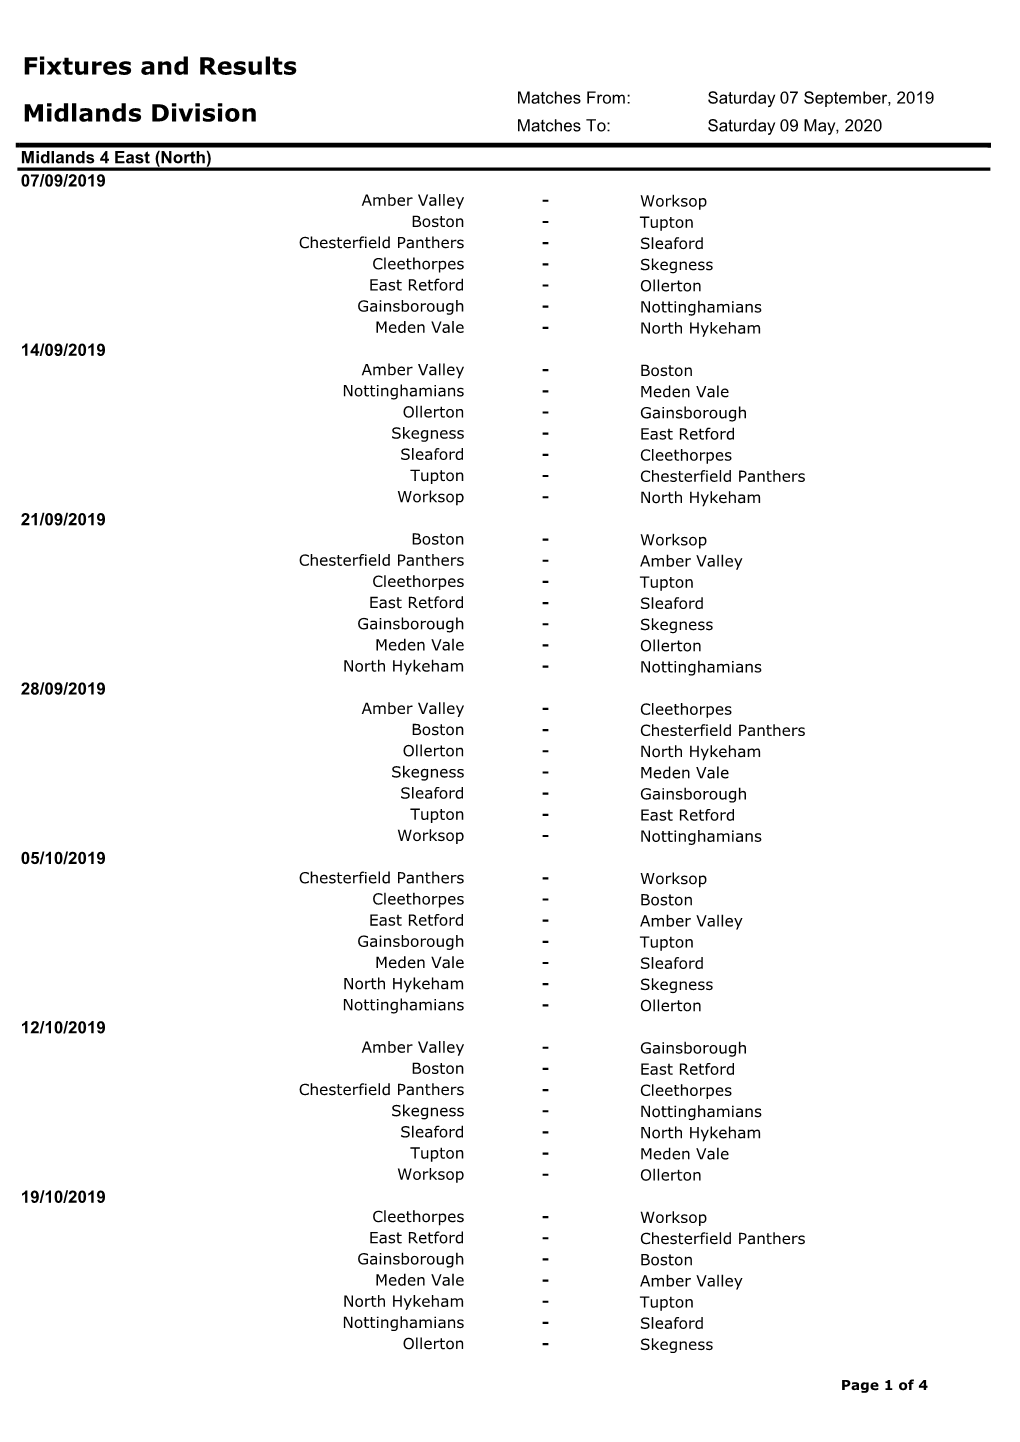 Fixtures and Results Midlands Division